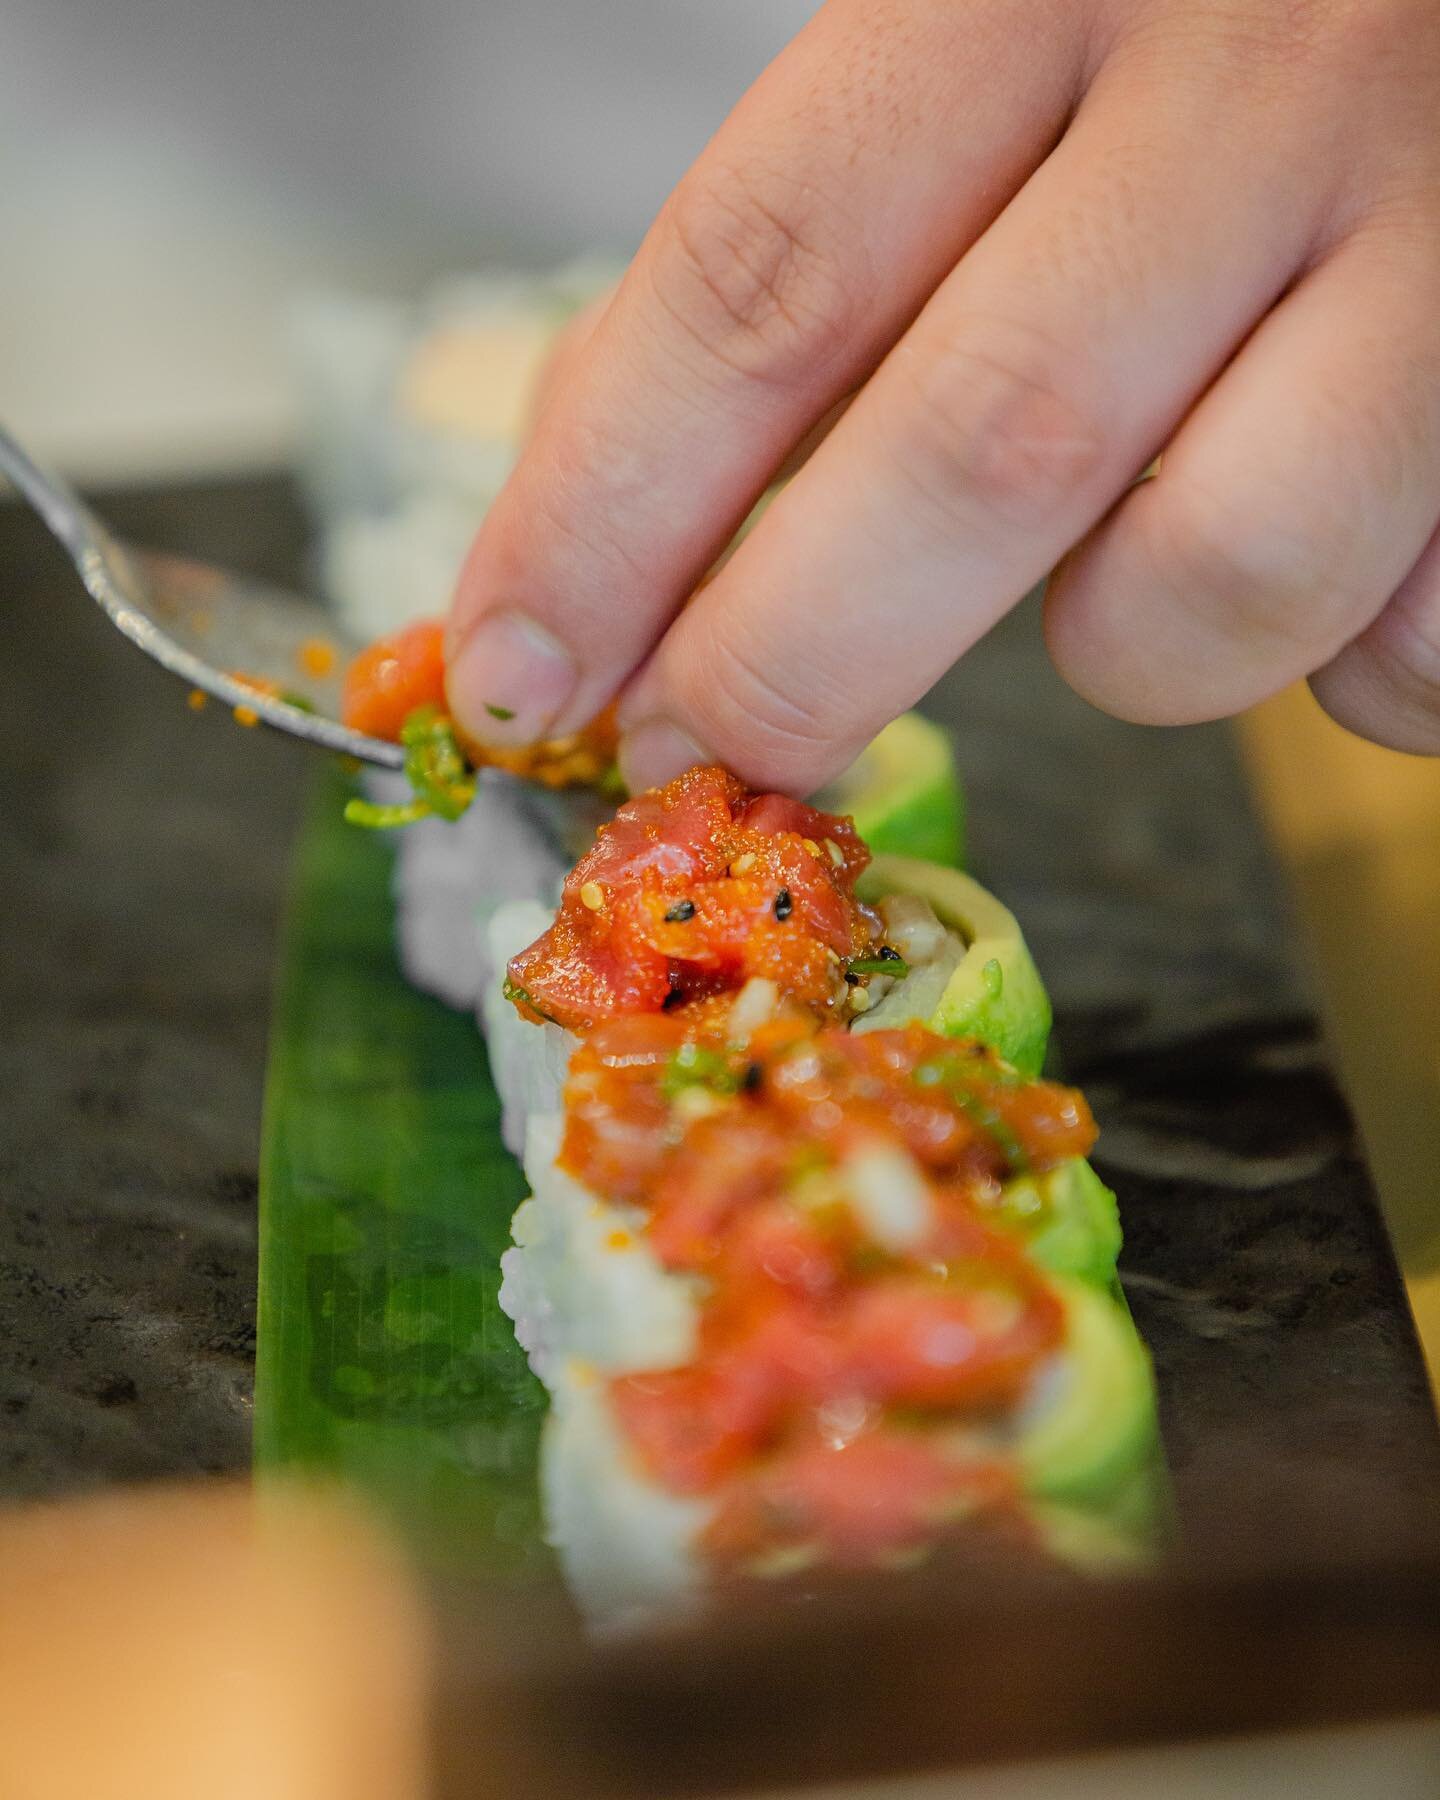 At Nori Sushi Bar, our sushi-making is pure artistry! 
Our chefs use the freshest ingredients to handcraft delicious rolls that will blow your mind. 🍣✨

#sushi #sushinight #sushitime #sushilovers #sushiporn #sushifan #arizonacuisine #arizonalife #Ar